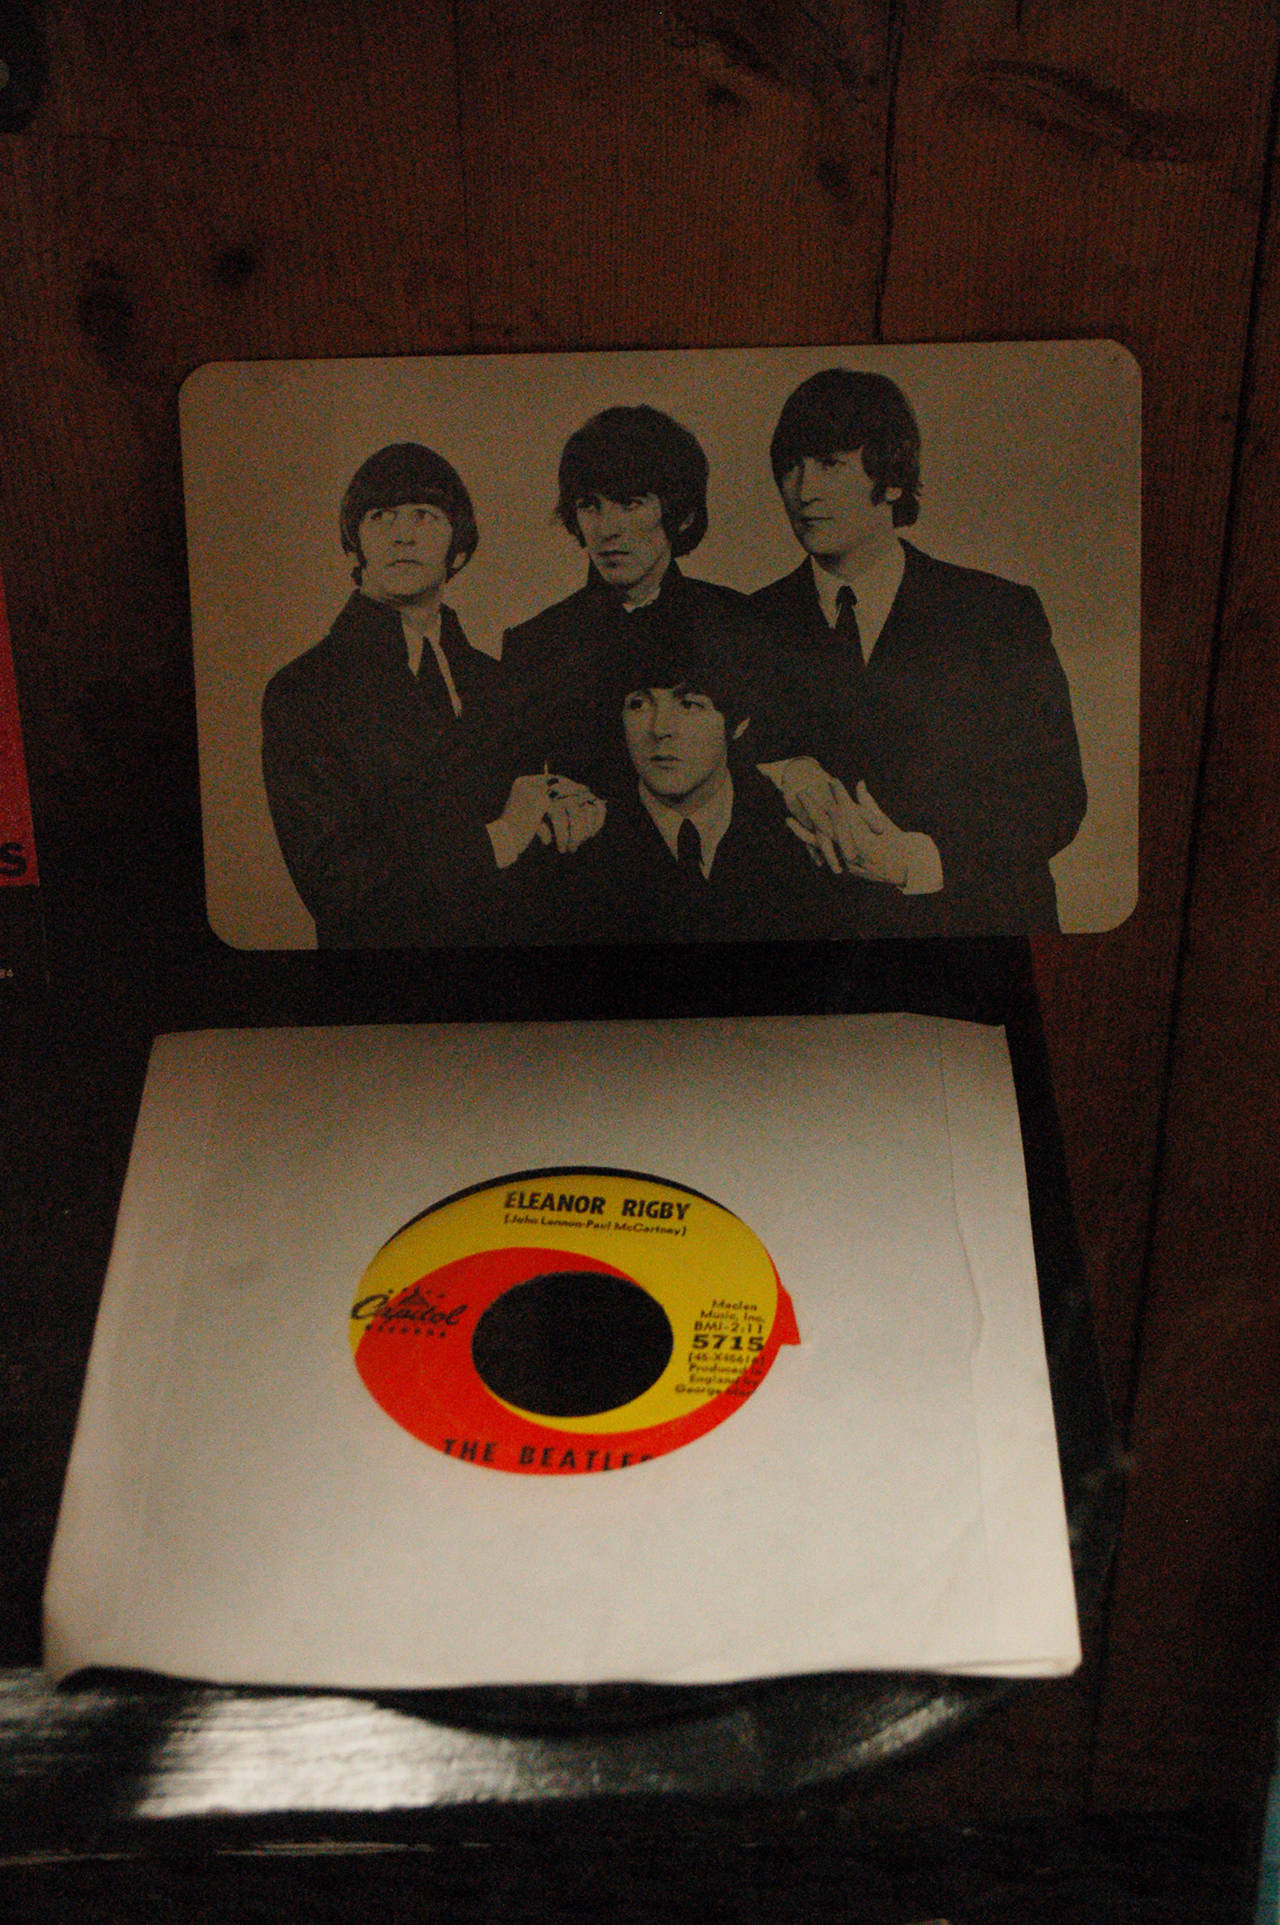 A vinyl single of Eleanor Rigby on display in the KSQM radio station community room along with a classic picture of The Beatles from the early days of the band. Collection owner George Dooley said that he saw “early on” that The Beatles were going to change things in the music industry. Sequim Gazette photo by Conor Dowley